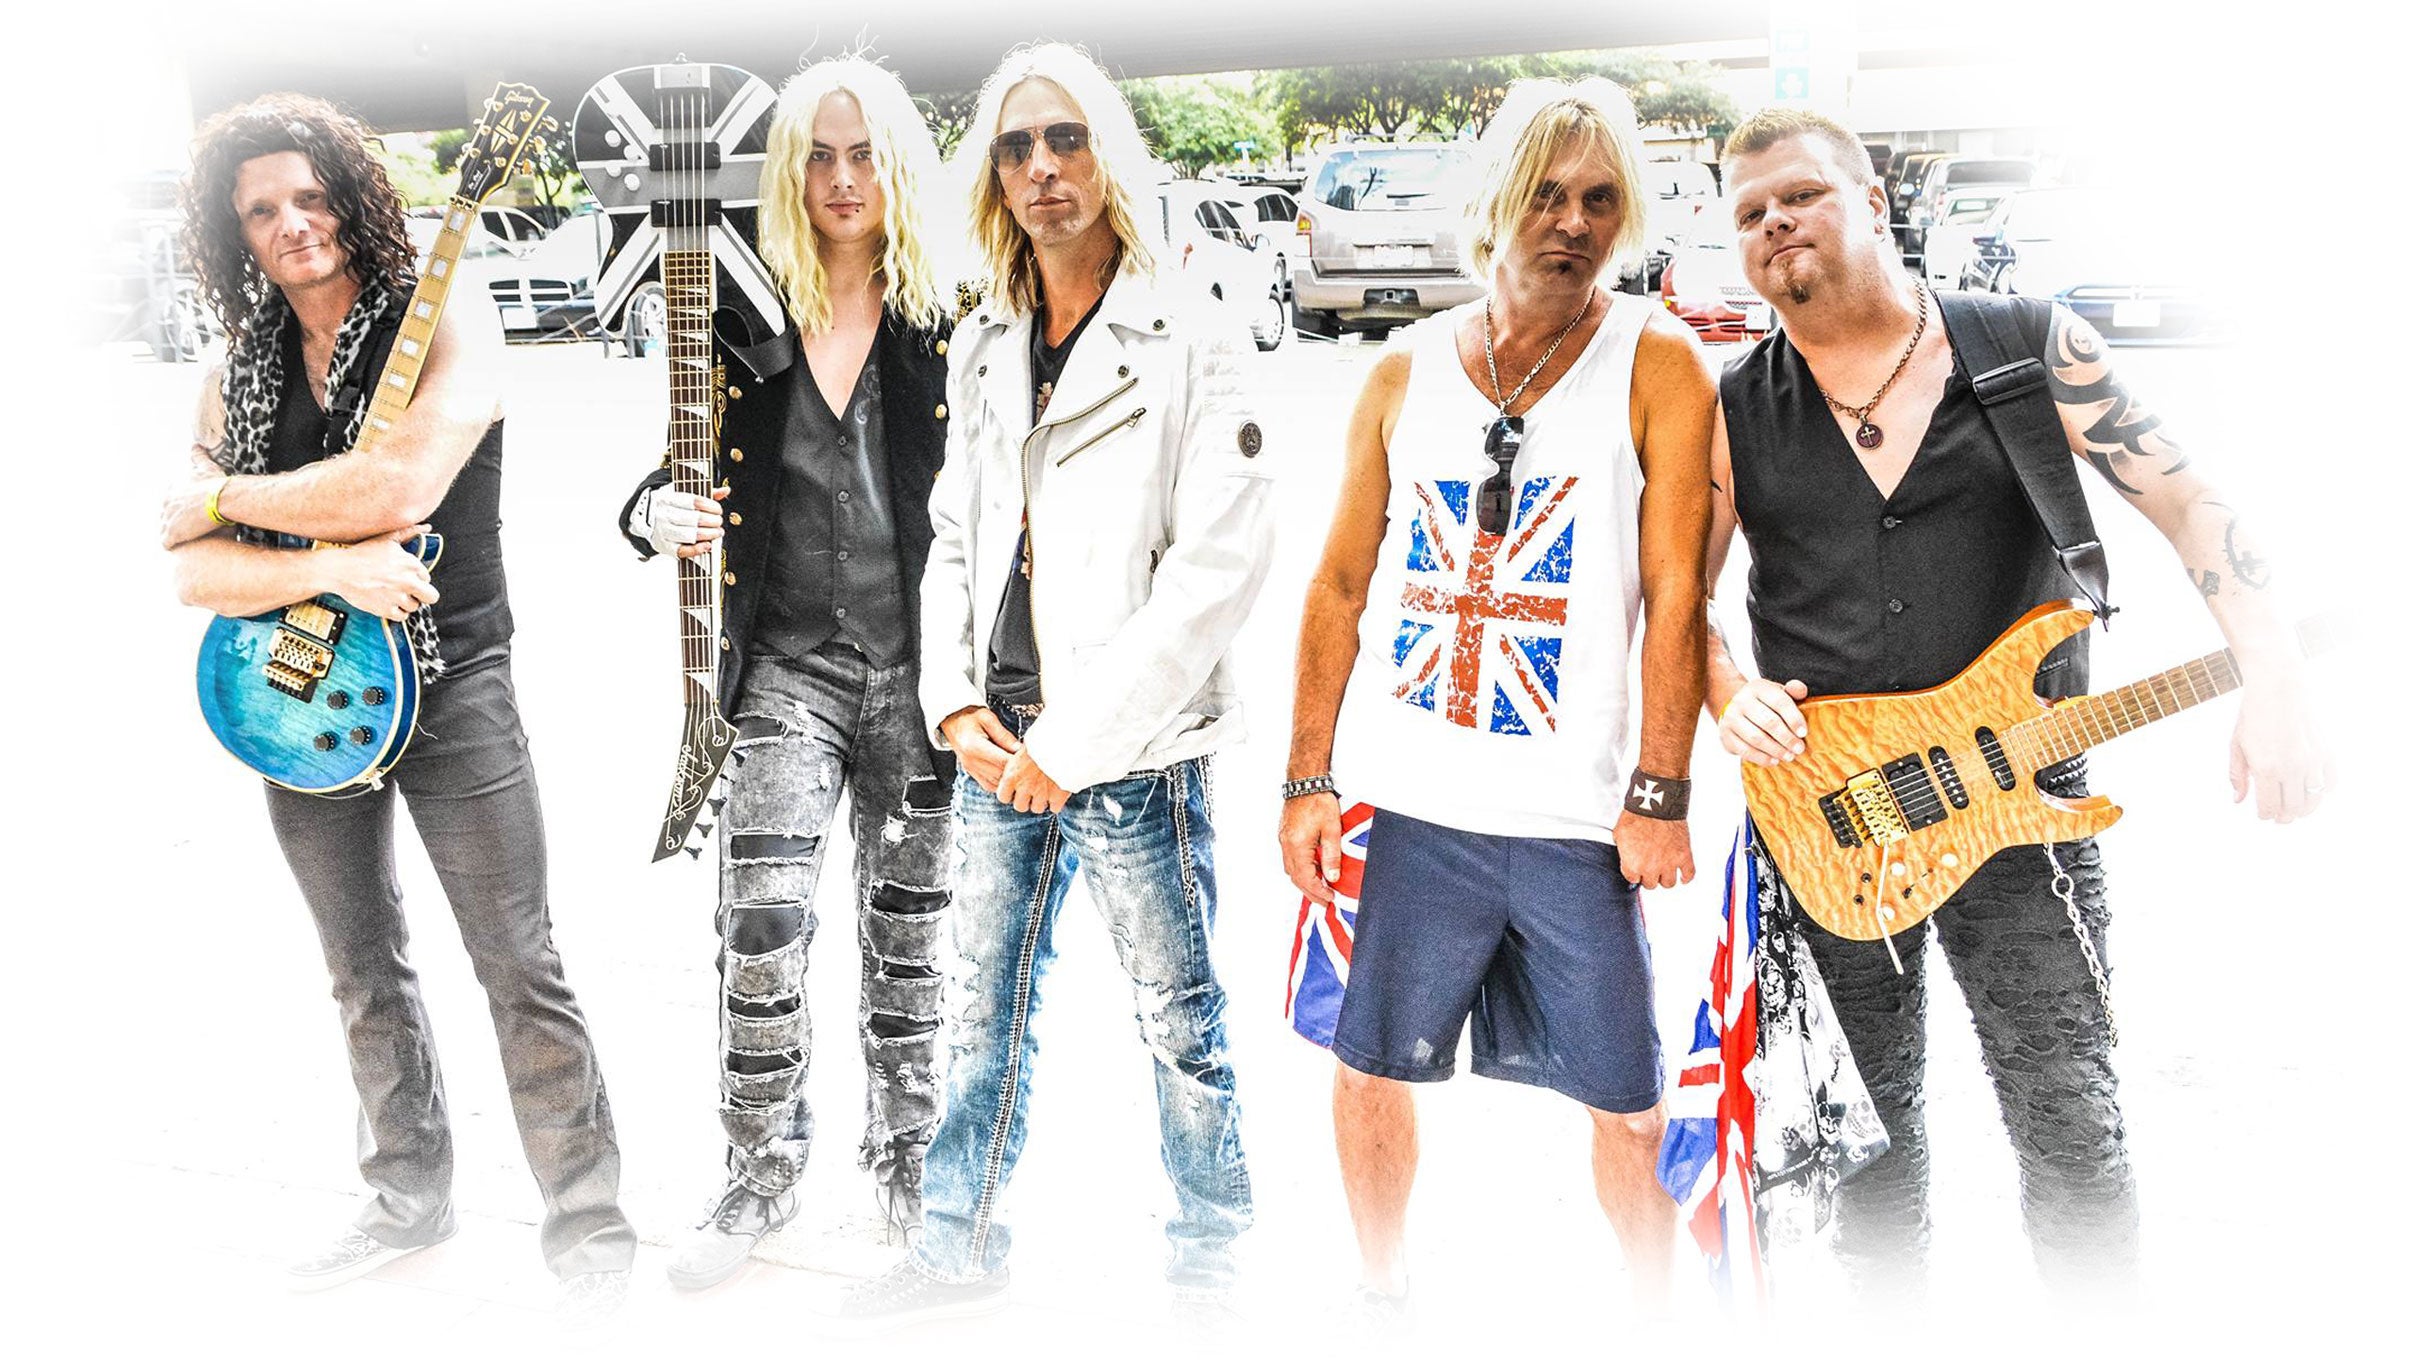 Def Leggend - The World's Greatest Tribute To Def Leppard in Louisville promo photo for Citi® Cardmember presale offer code